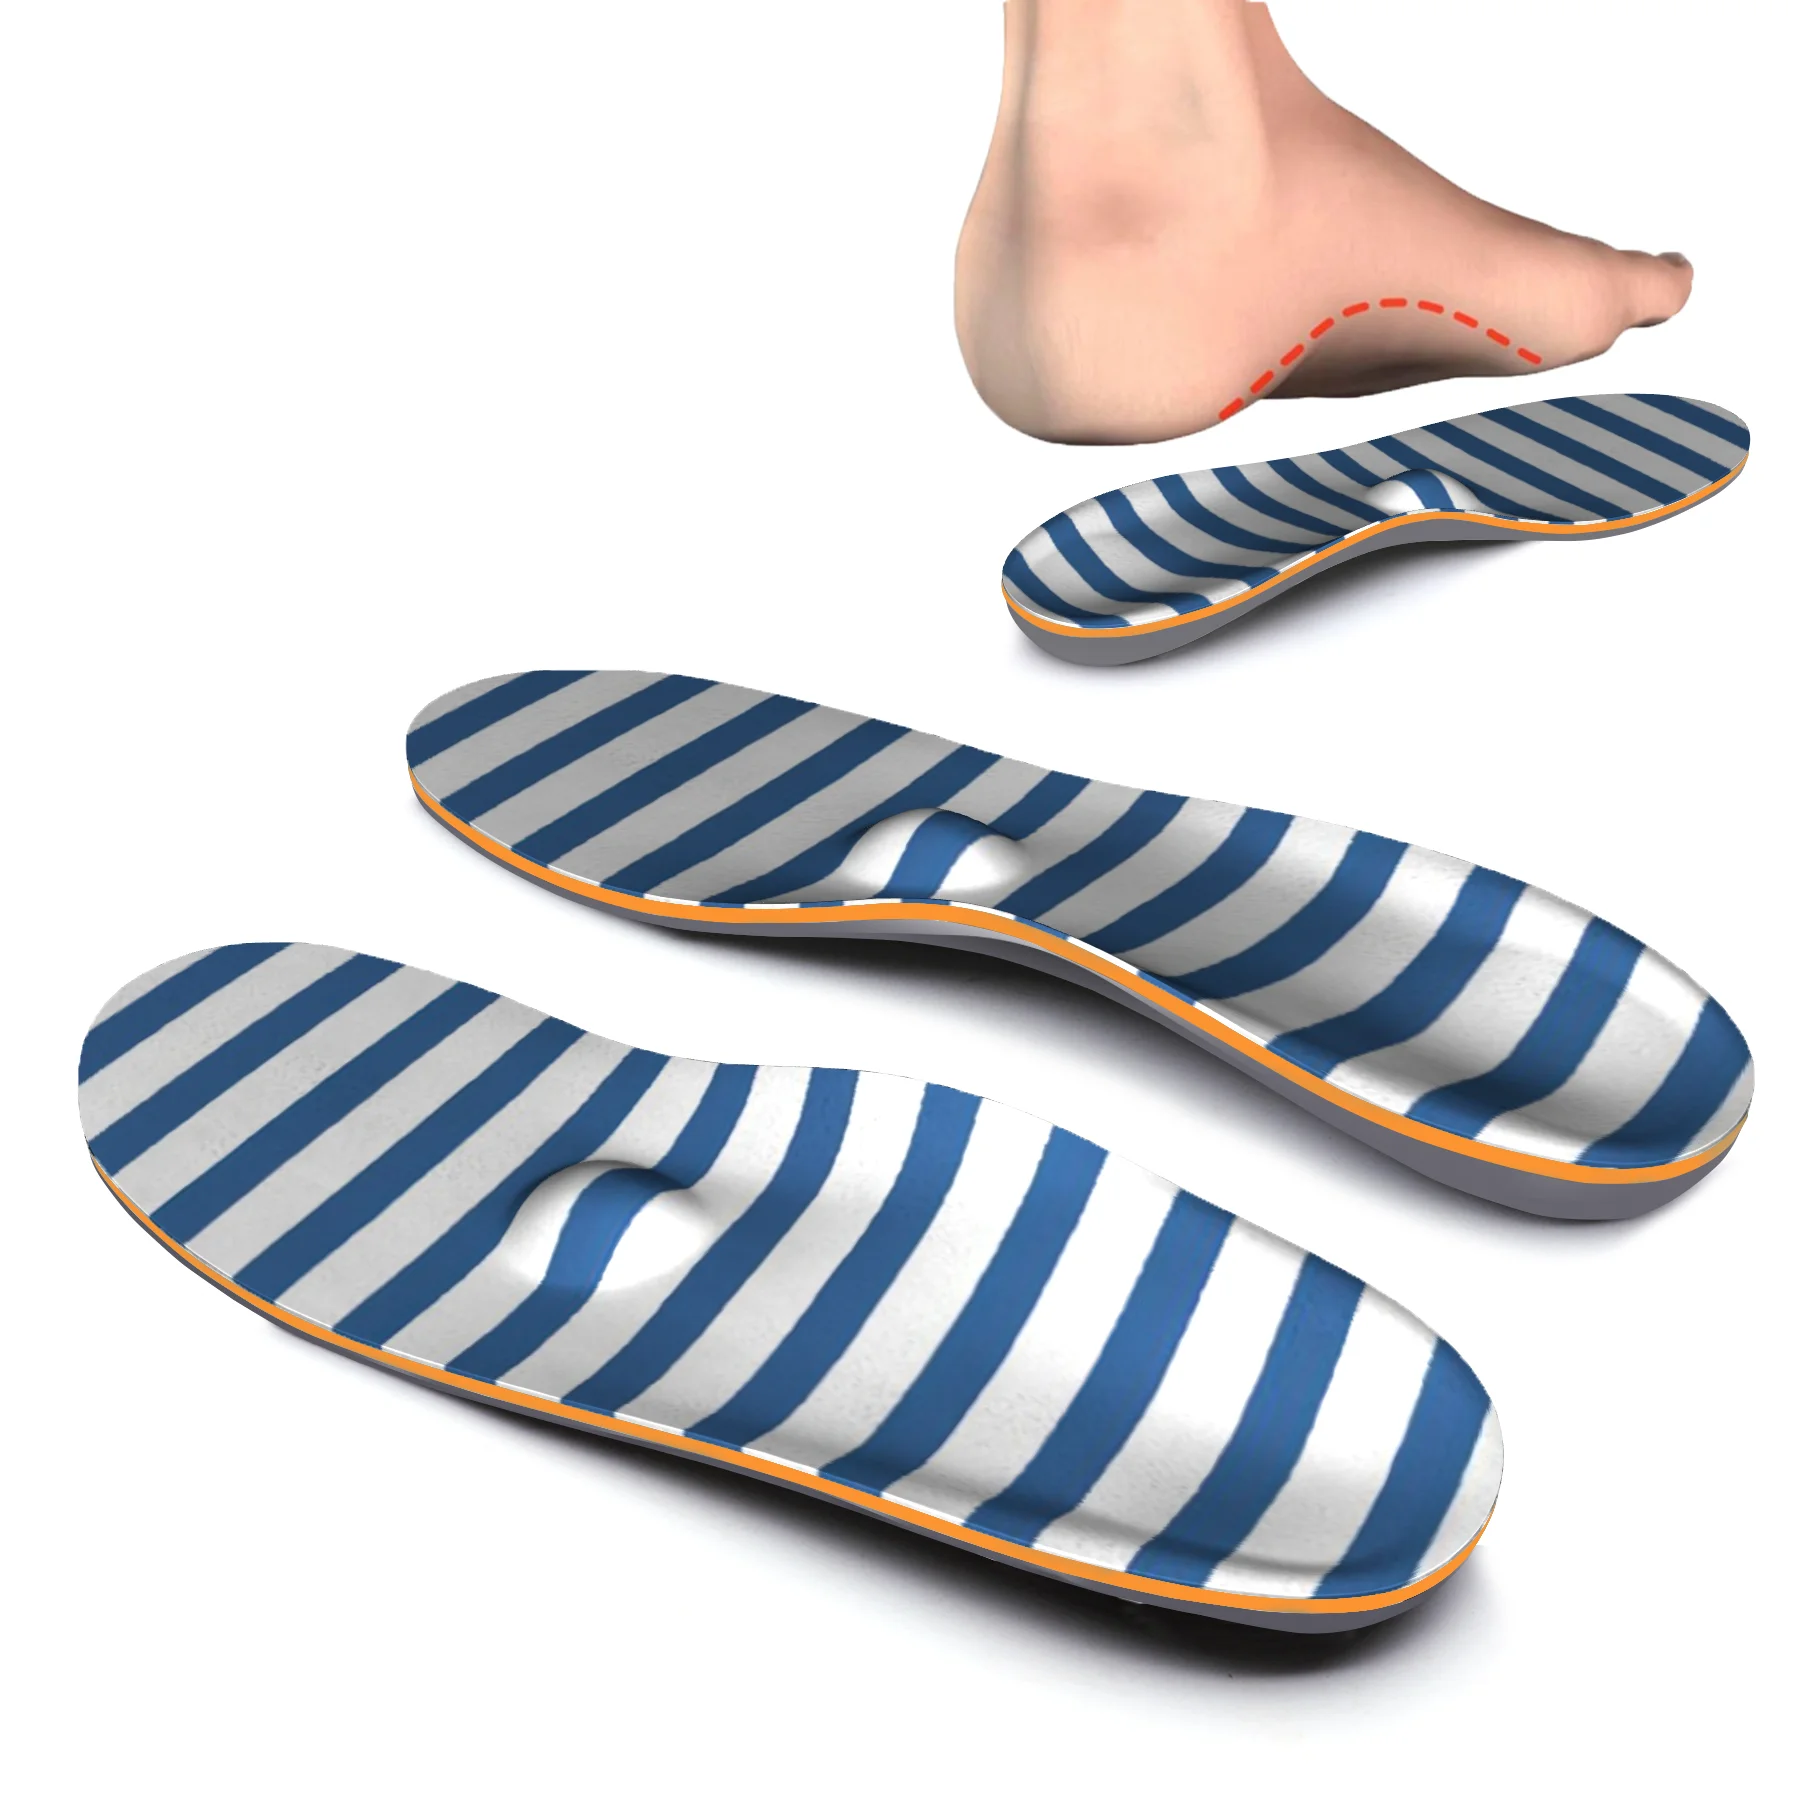 

Blue Stripe Memory Foam High Arch Support Insole Flat Feet Foot Orthopedic Insoles for Men and Women Metatarsal Sufferer